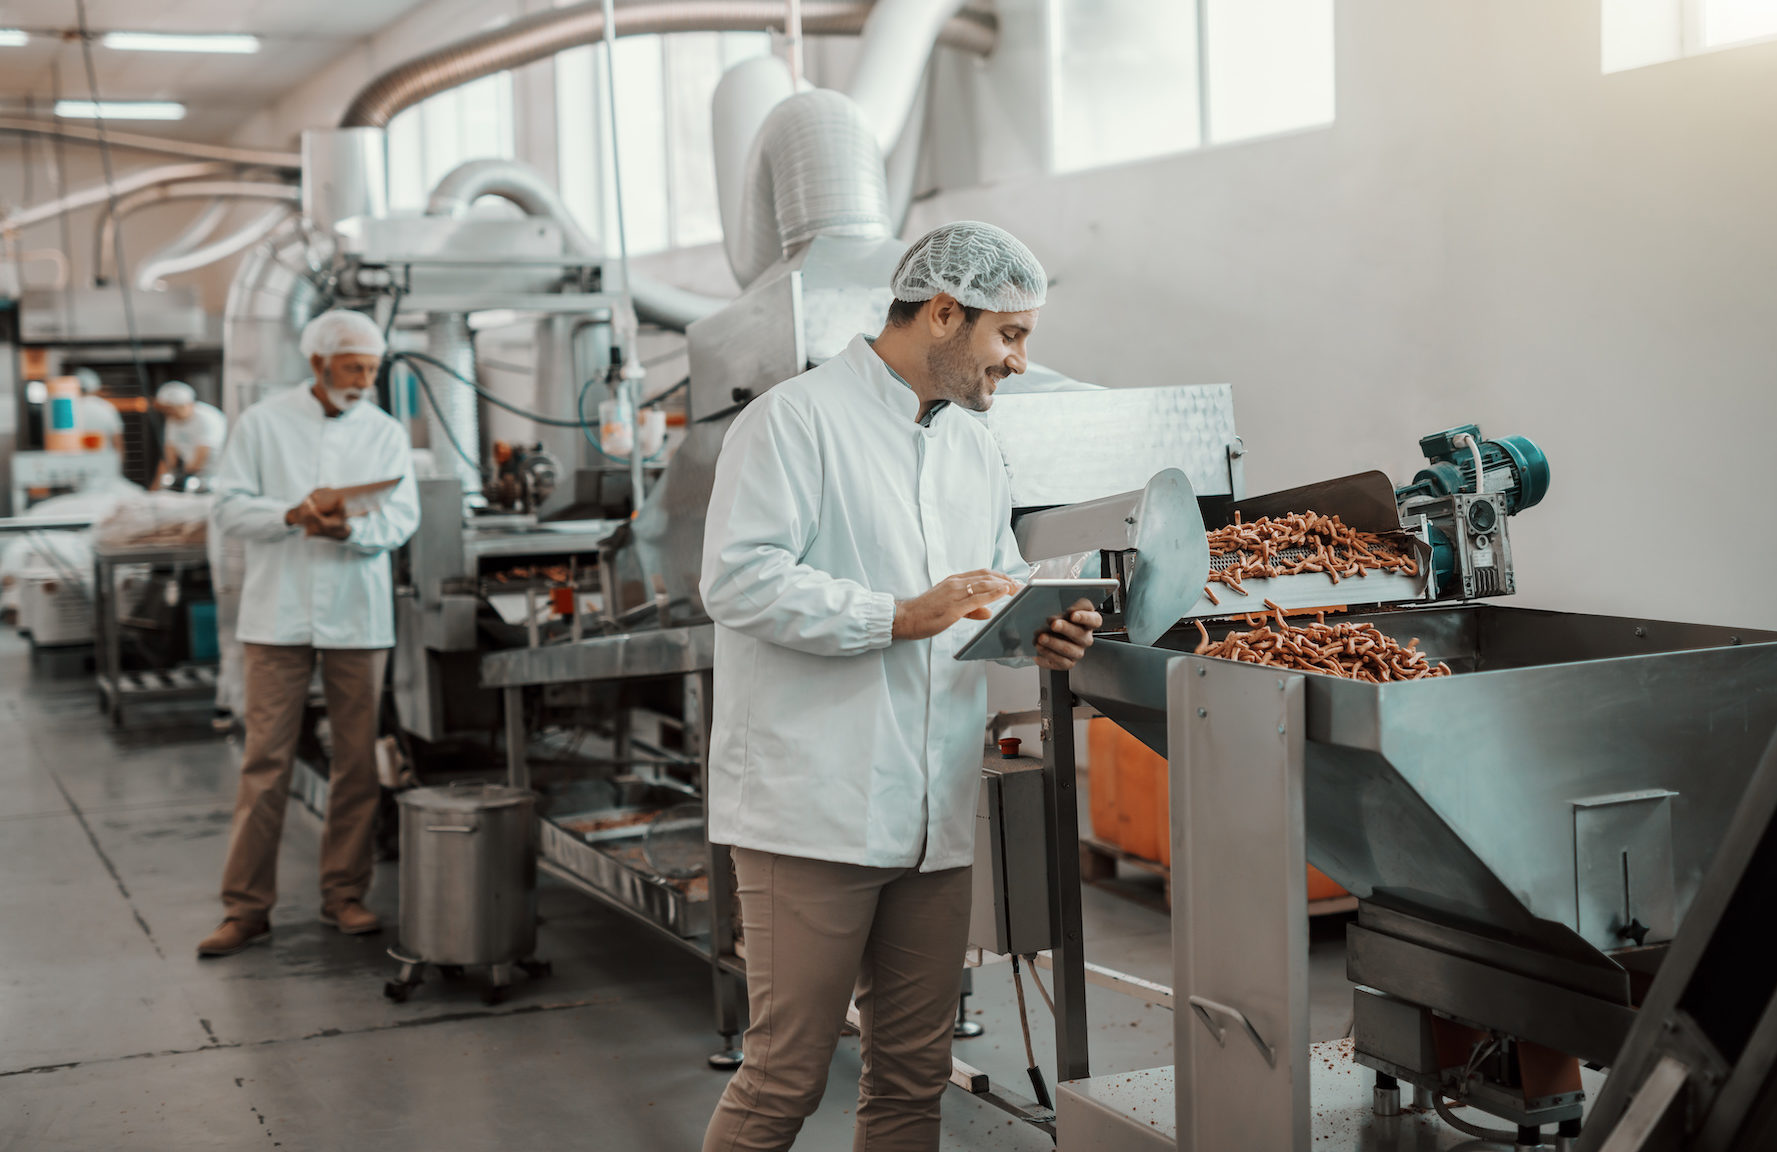 Supervisor evaluating quality of food in food plant while holding tablet. Man is dressed in white uniform and having hair net.